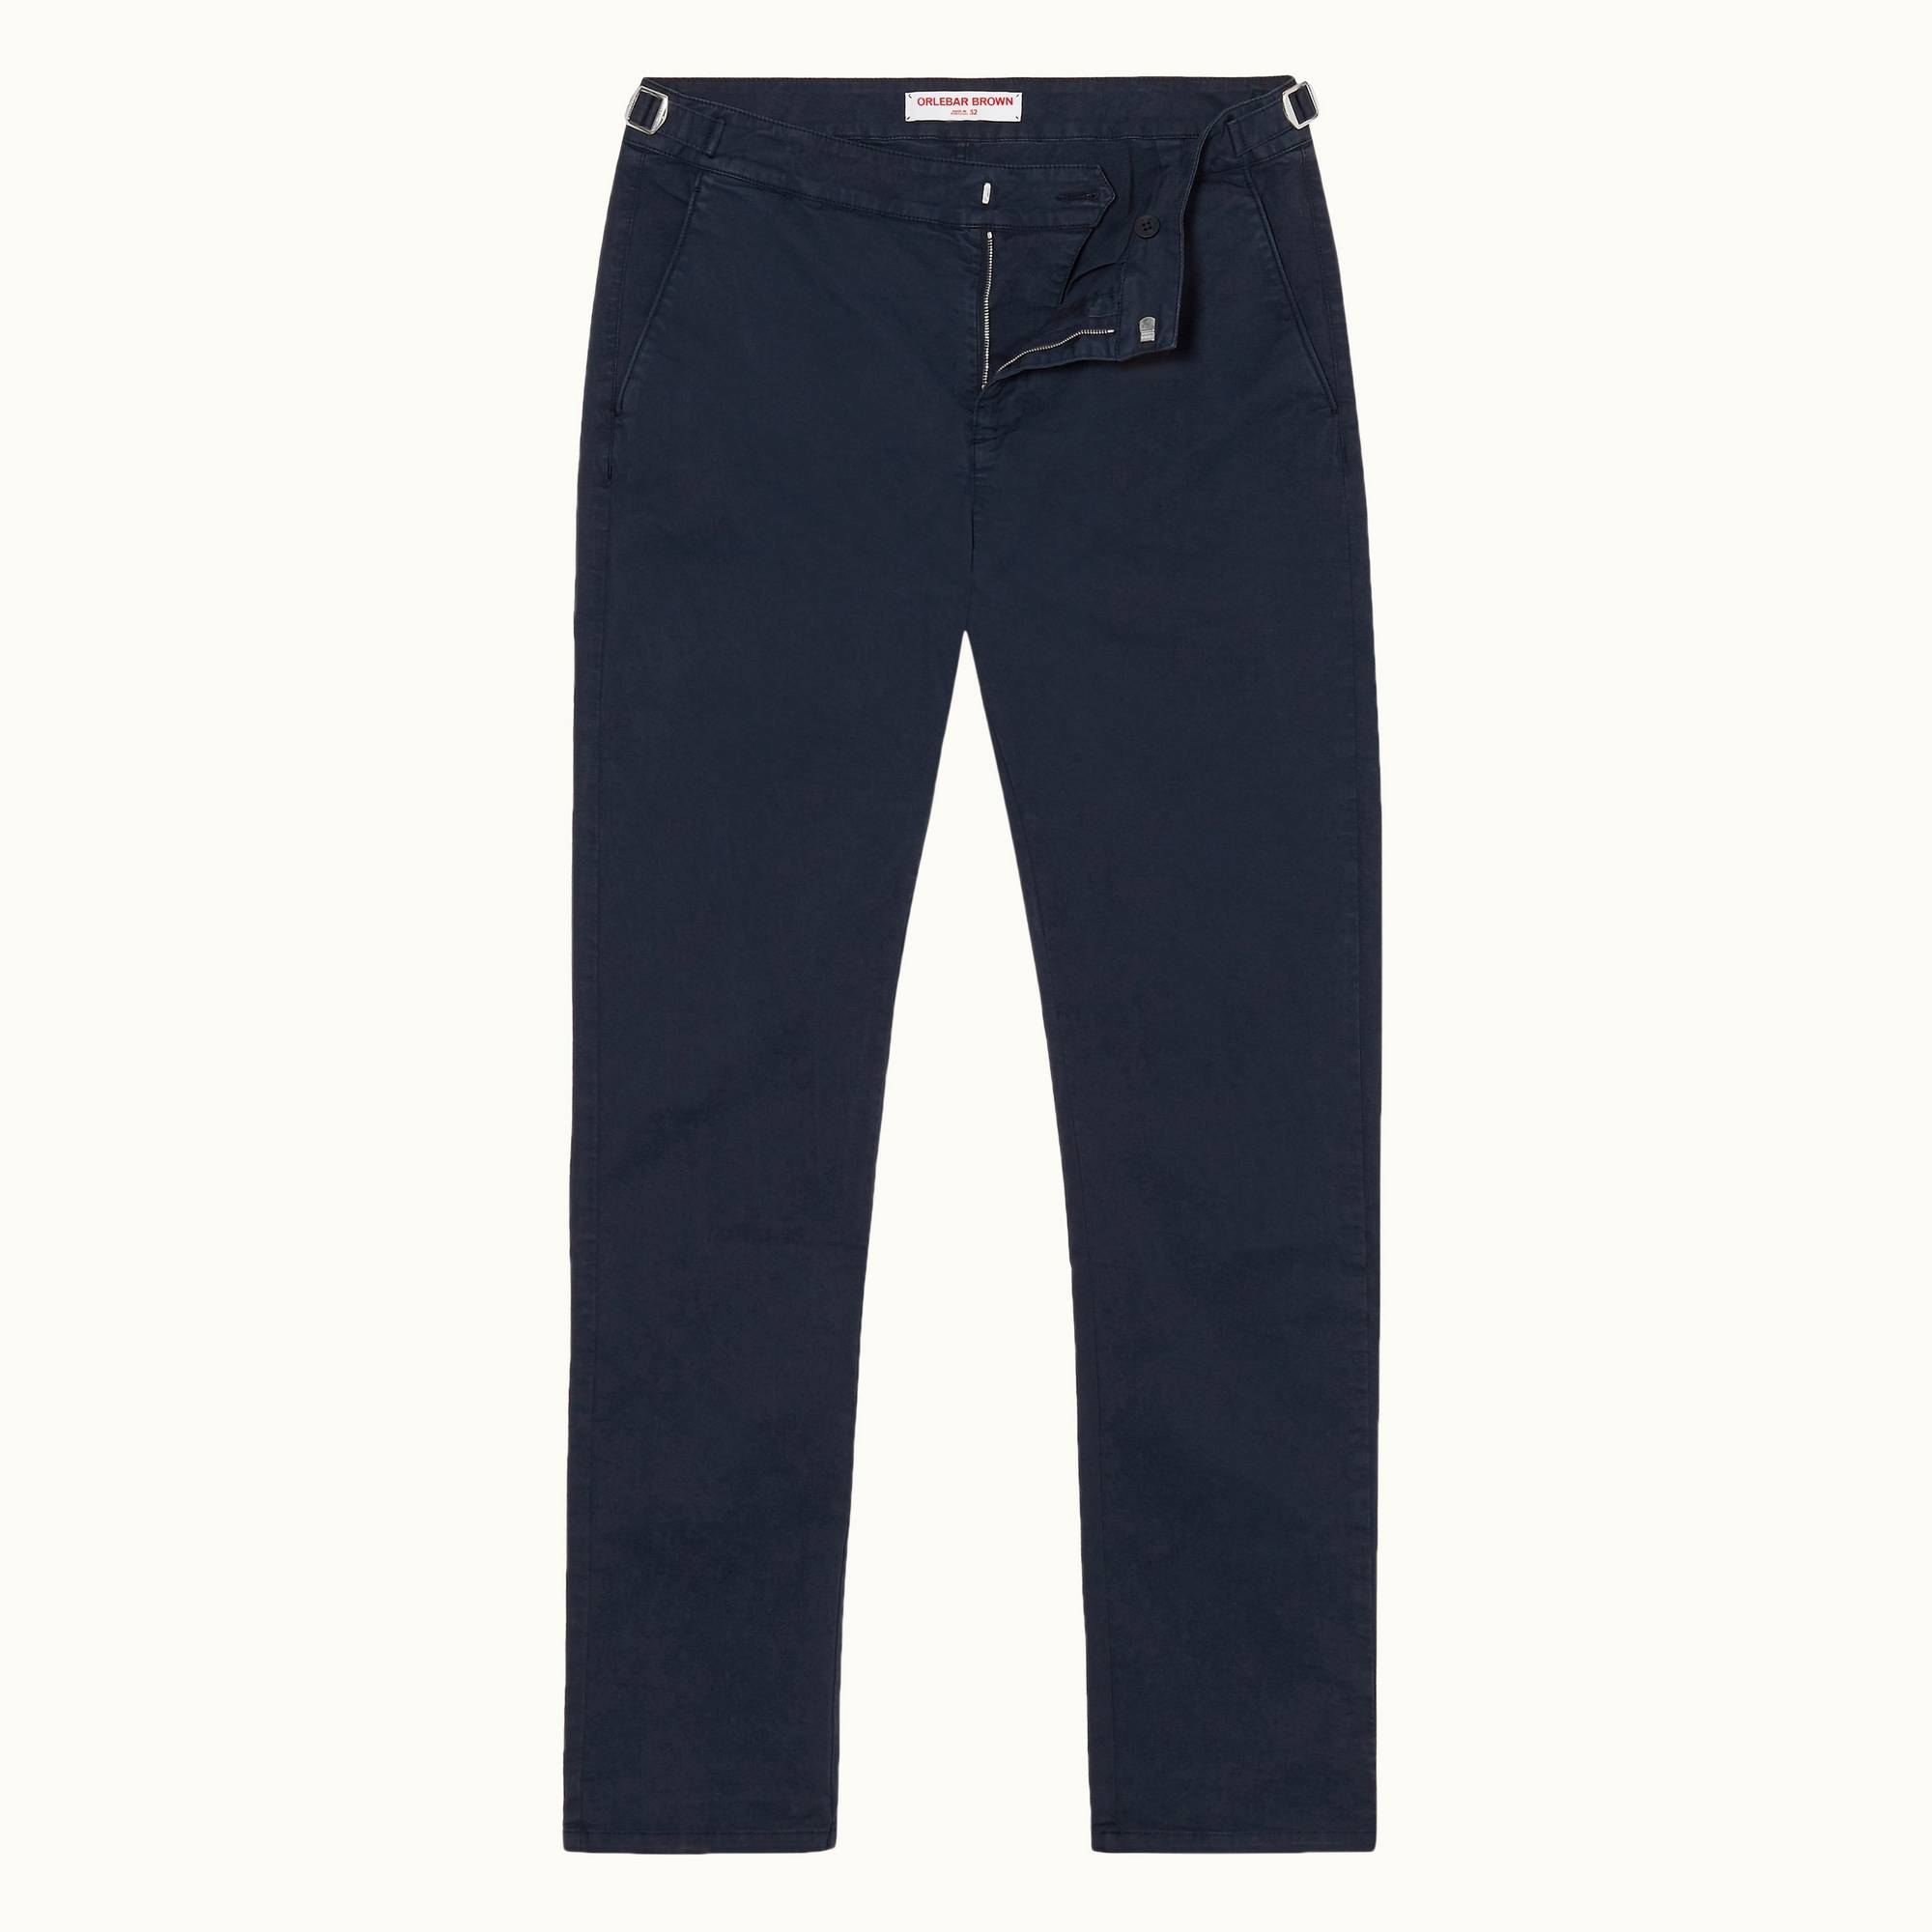 Campbell - Mens Navy Slim Fit Stretch Chinos